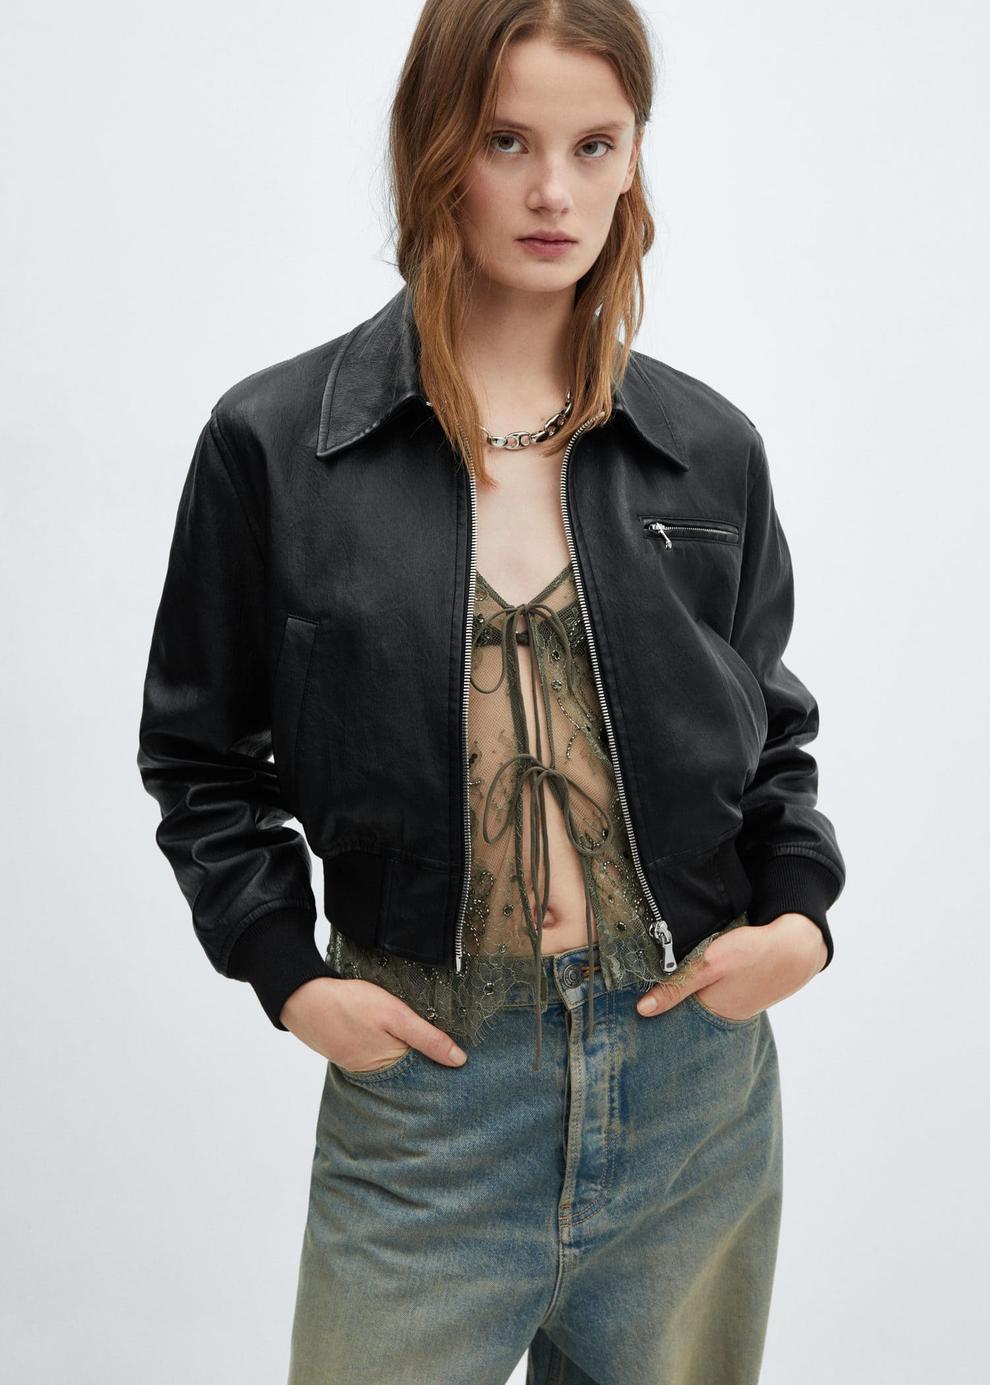 Vintage leather-effect jacket offers at £49.99 in MANGO